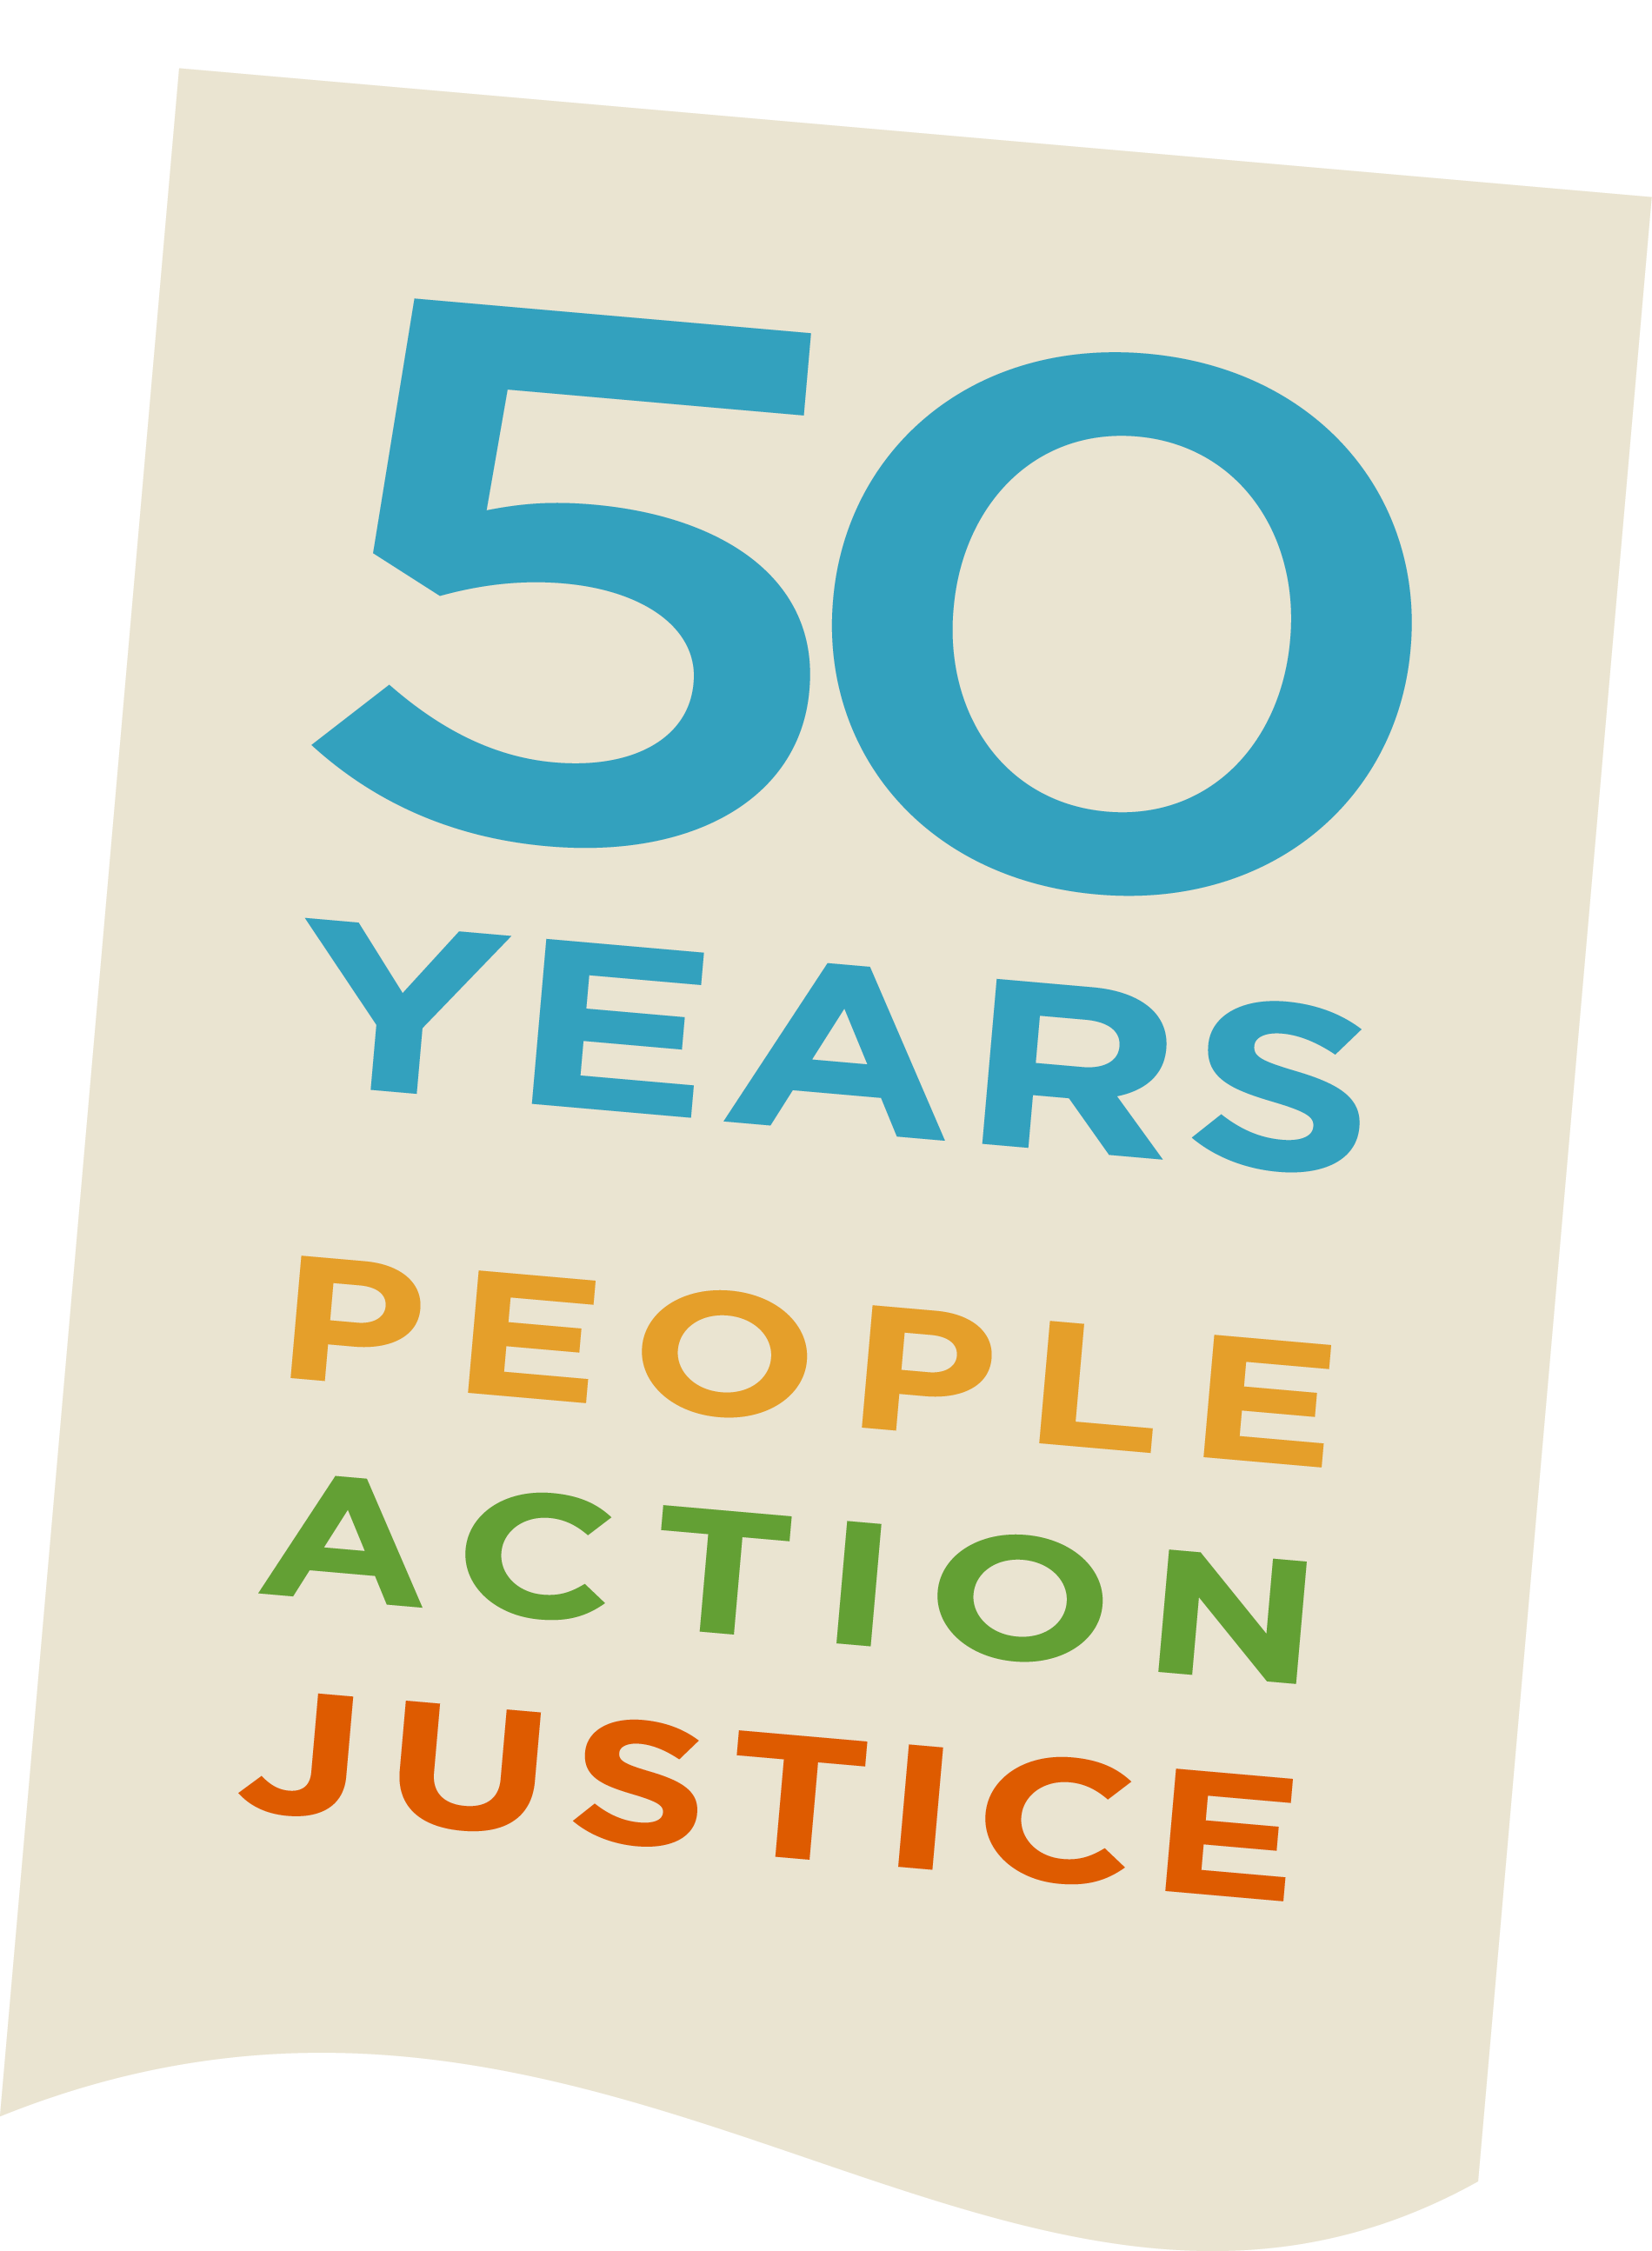 Celebrating 50 years of action for clean water